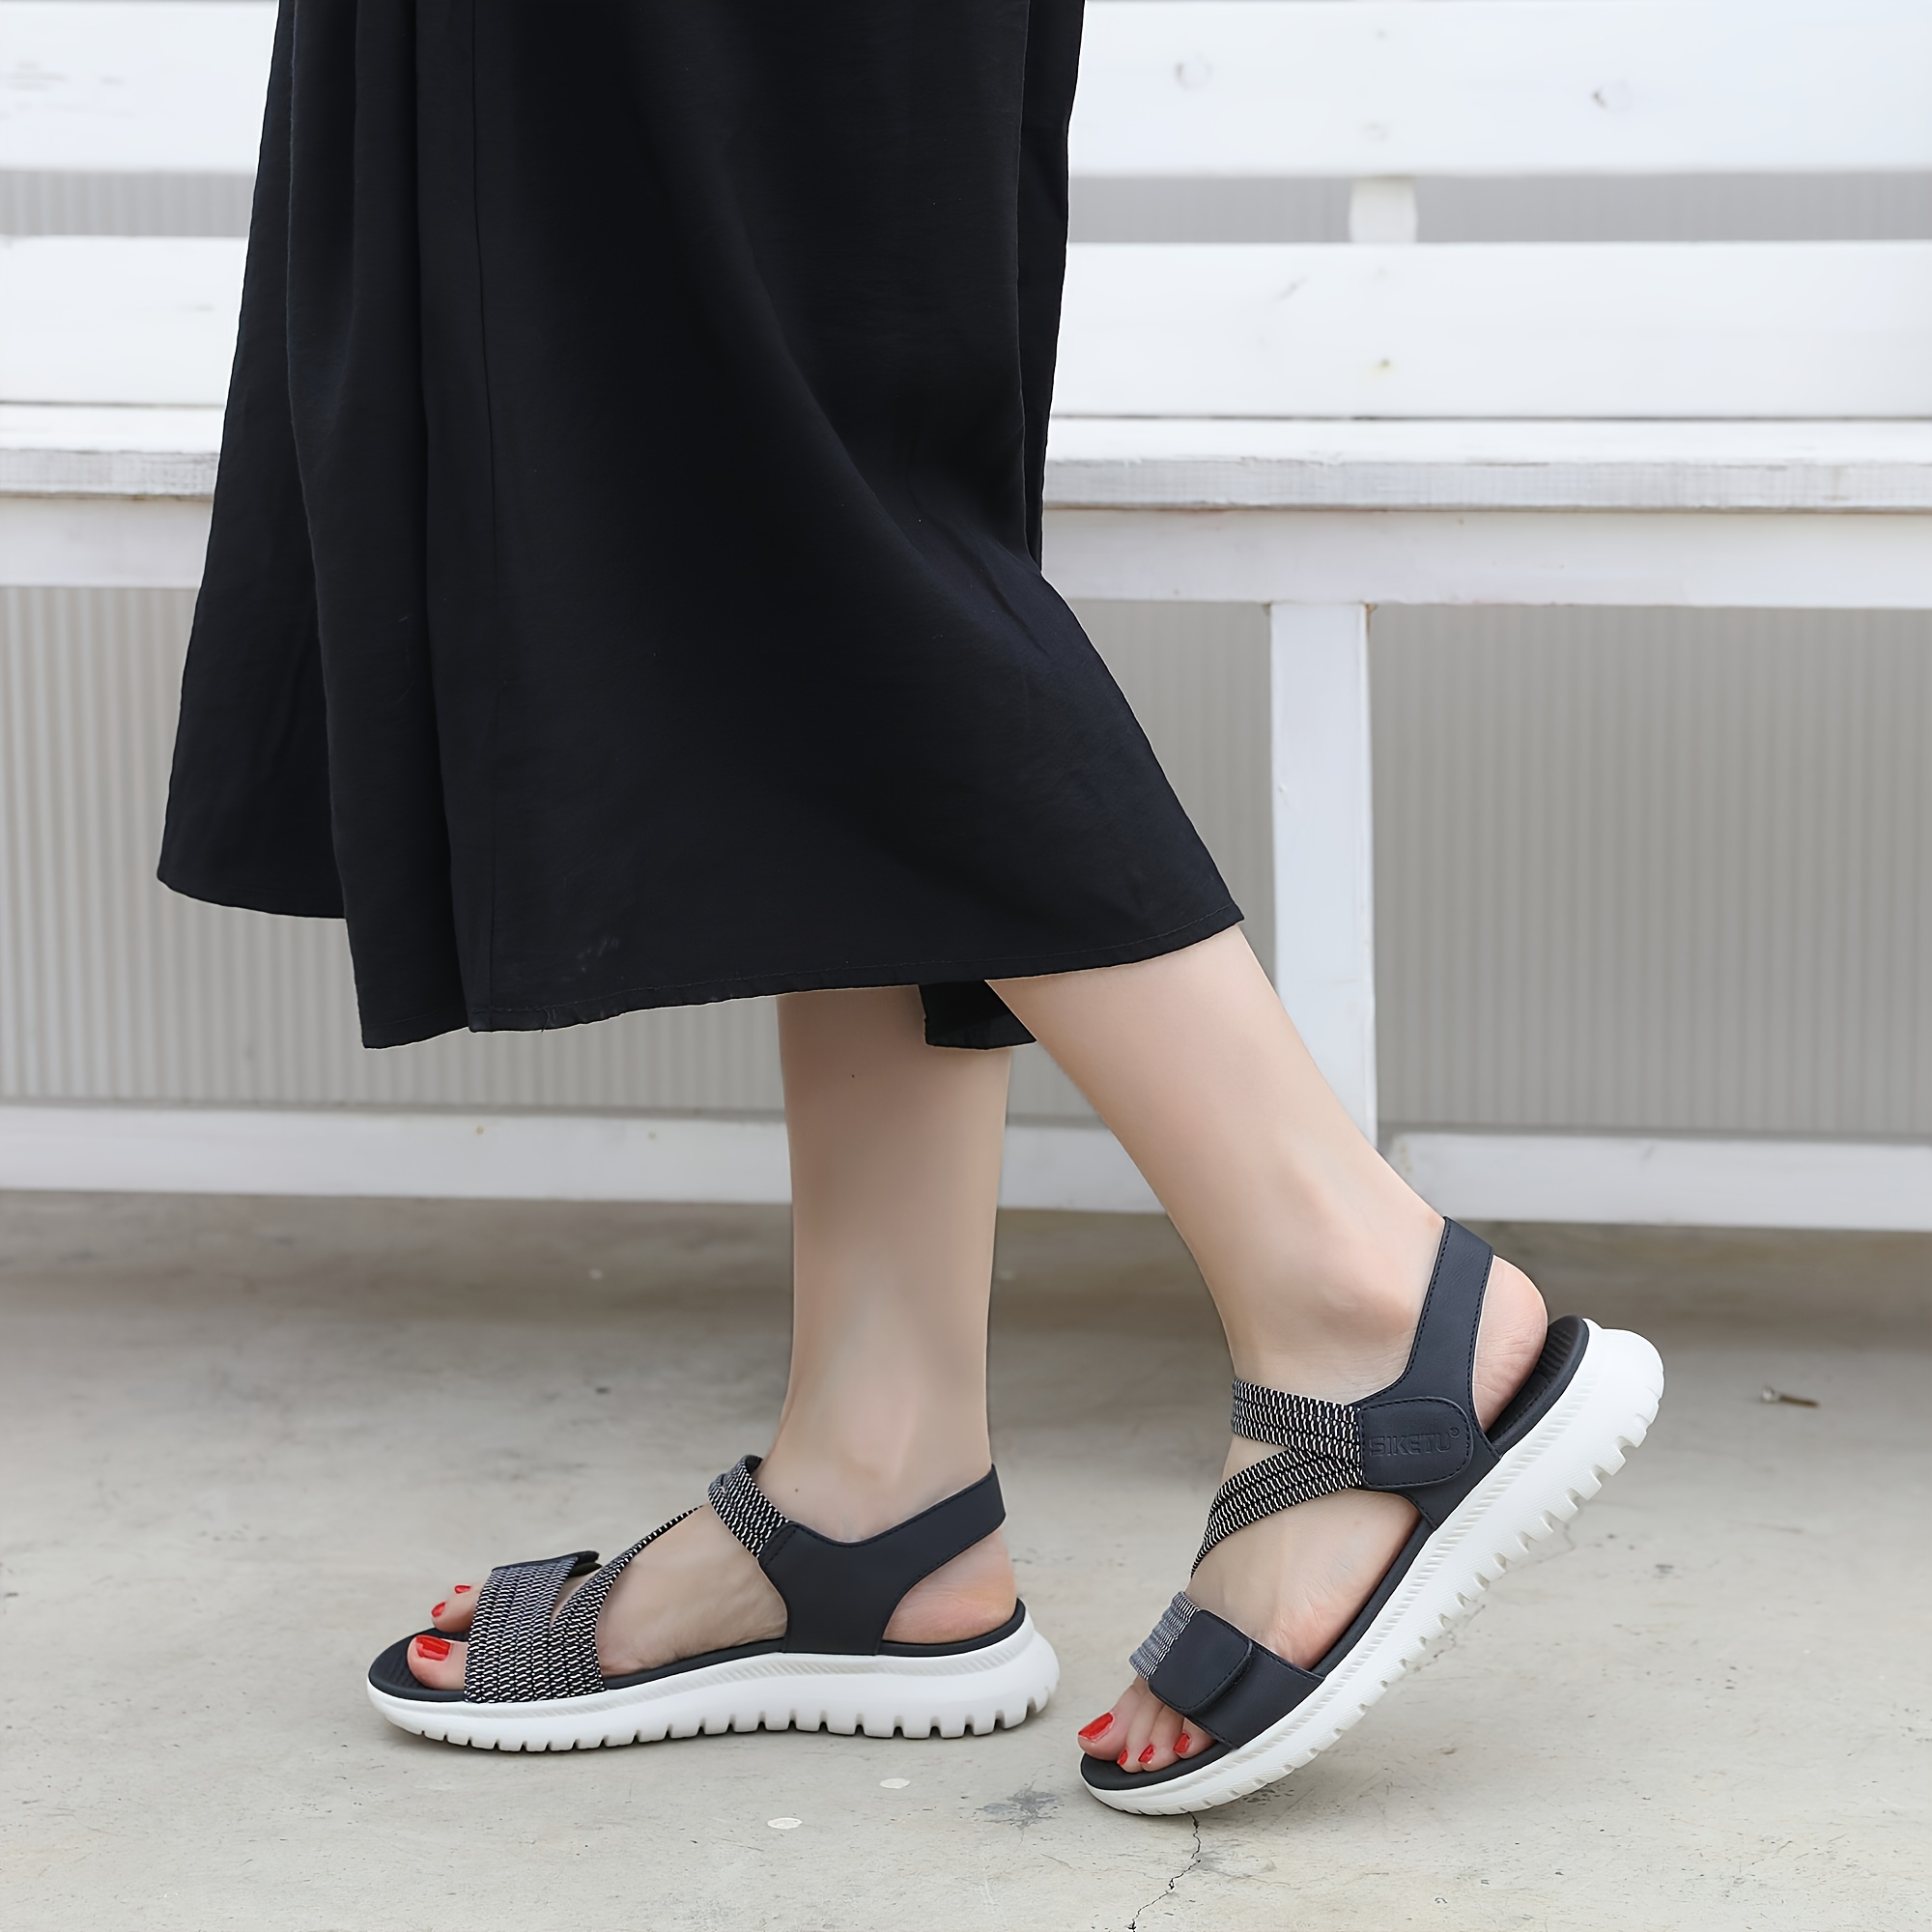 Fashionable and Comfortable Soft Flat Women Summer Sandals Ladies